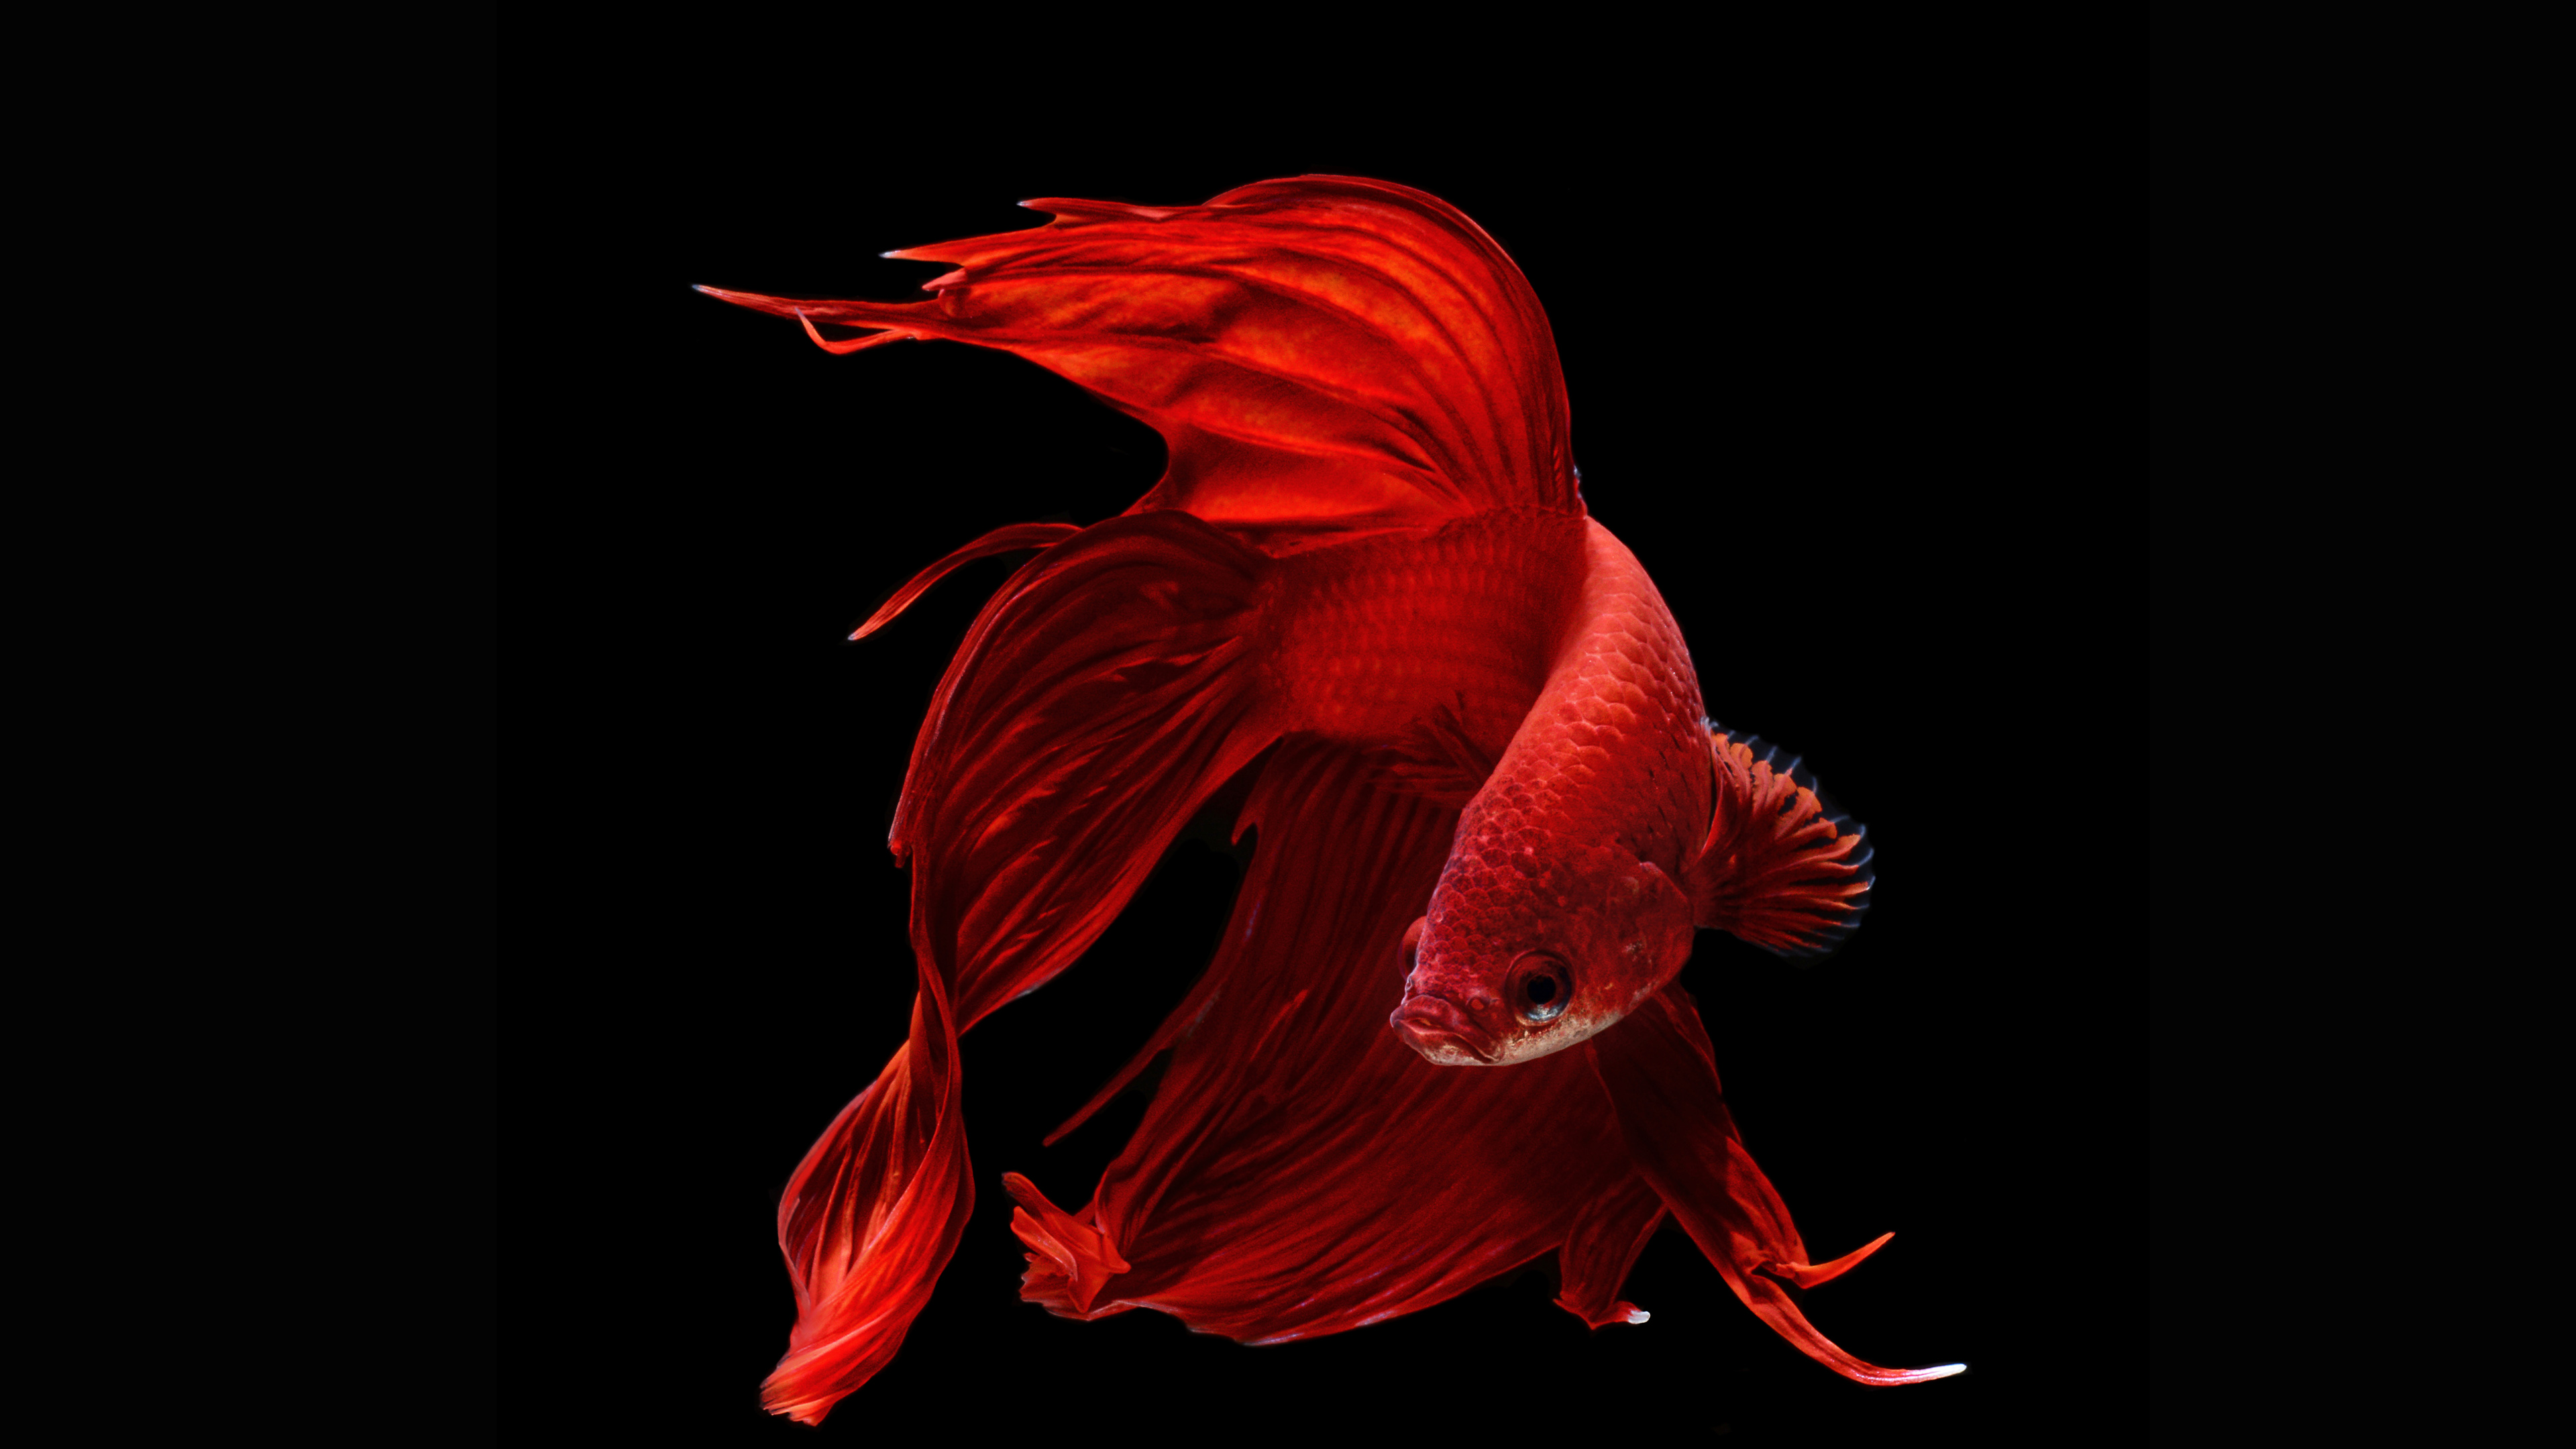 Red Fish With Long Fins - HD Wallpaper 